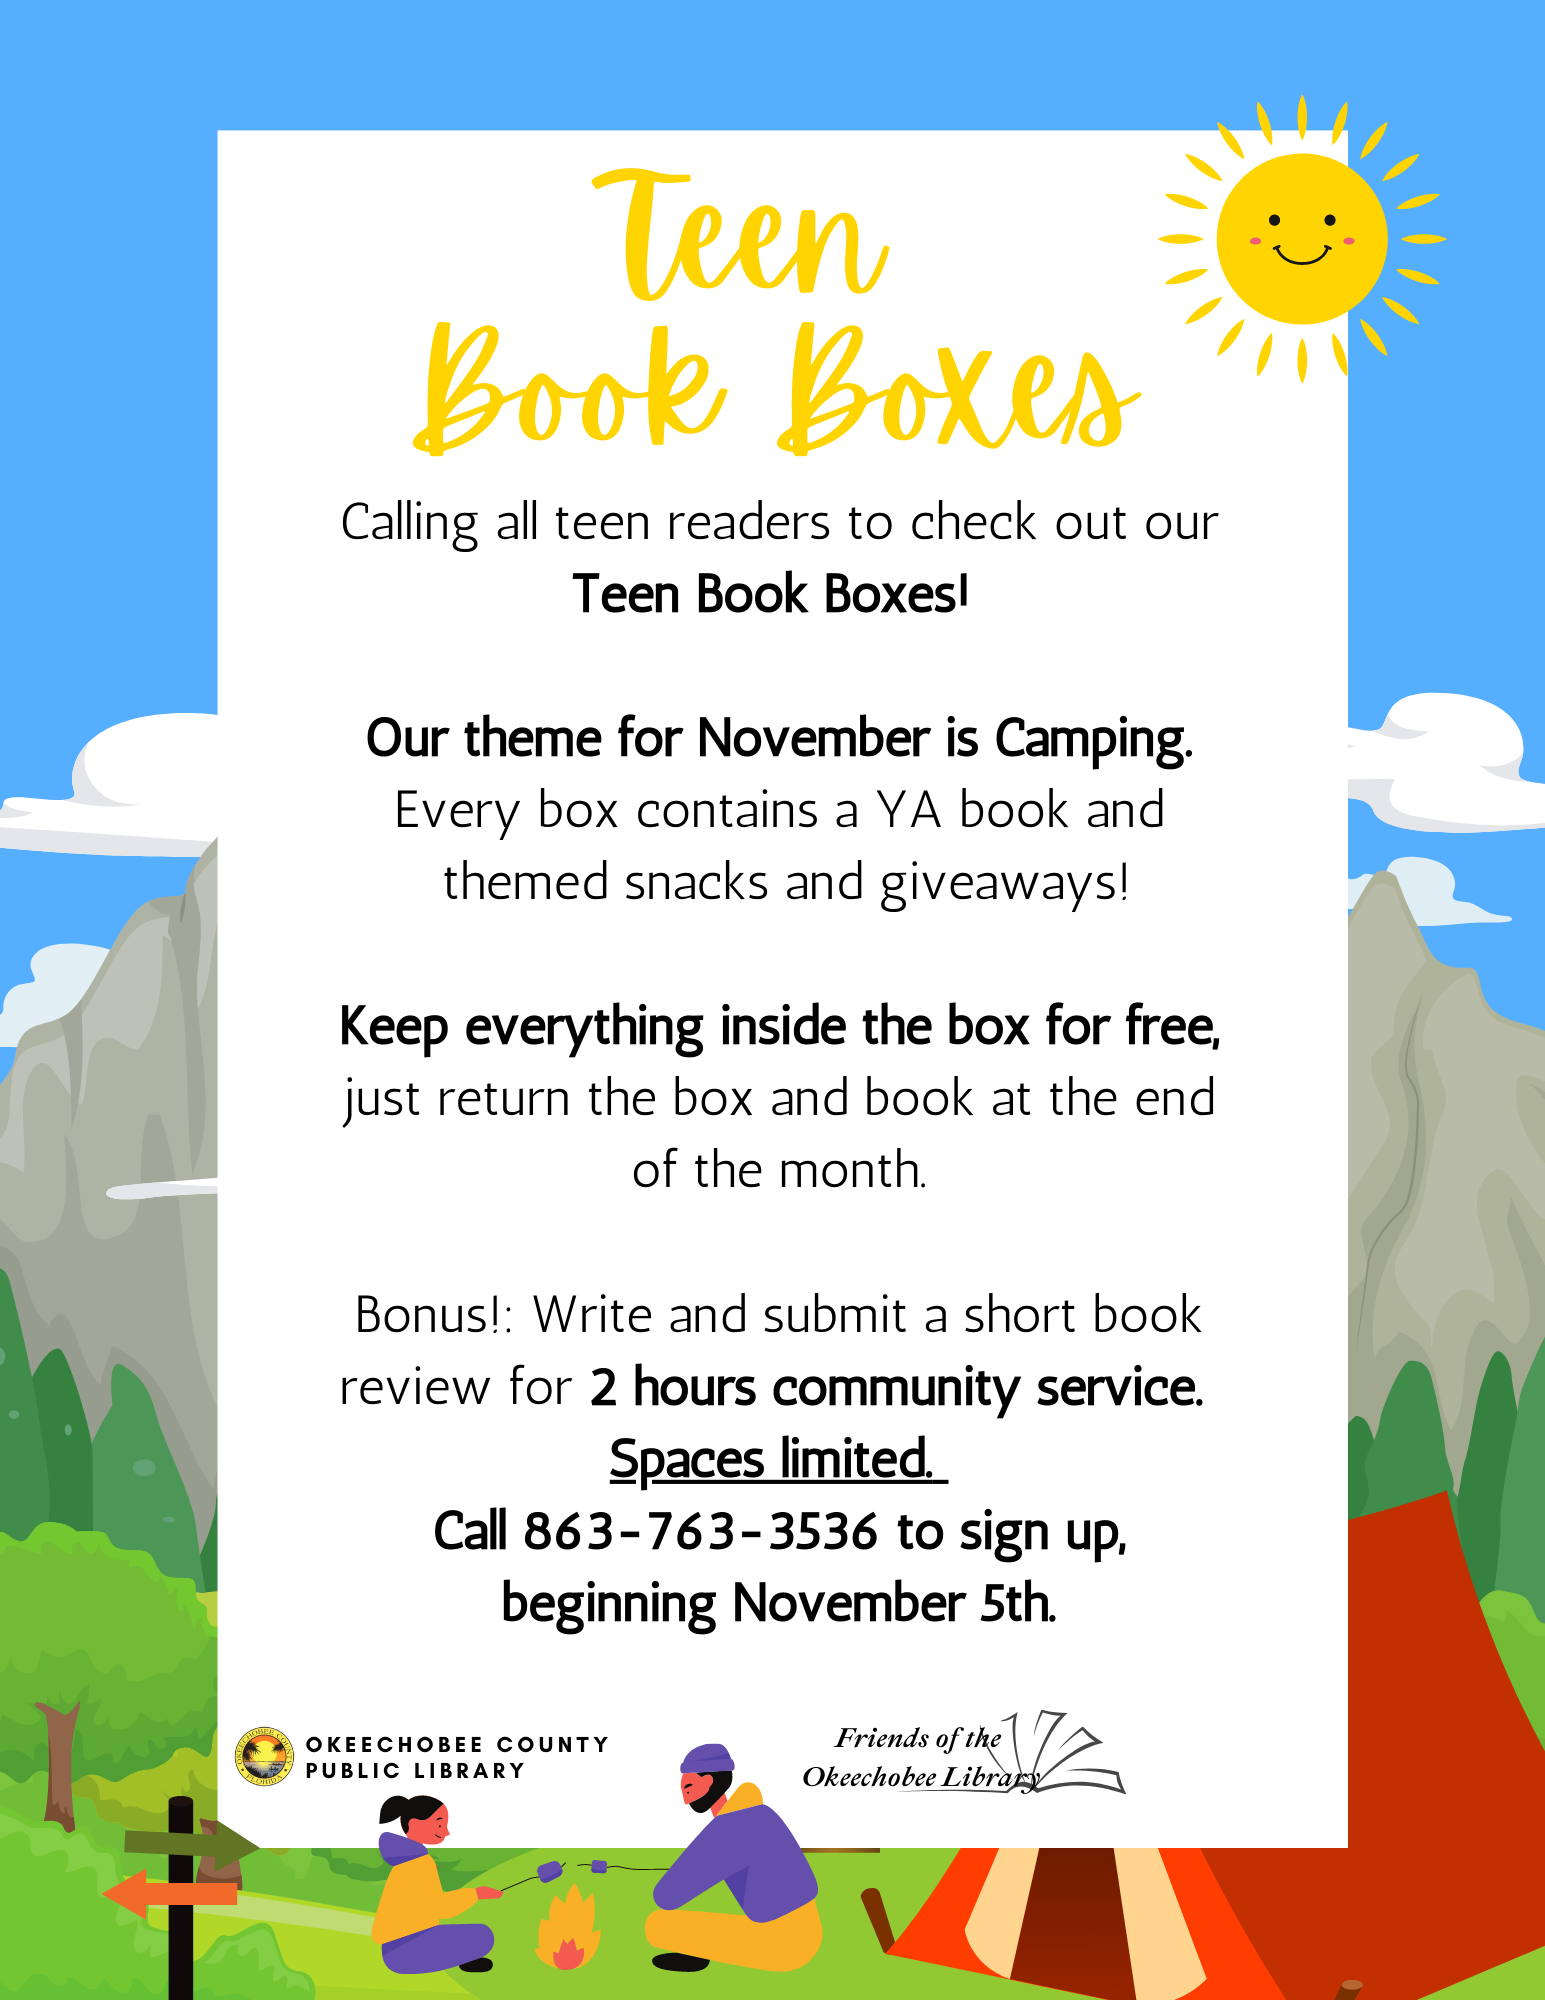 " November Teen Book Boxes! Open to all teens, get free prizes and snacks just for checking out a book! Bonus: Write a short summary/review of the book and turn it in to get up to 2 hours of community service!"